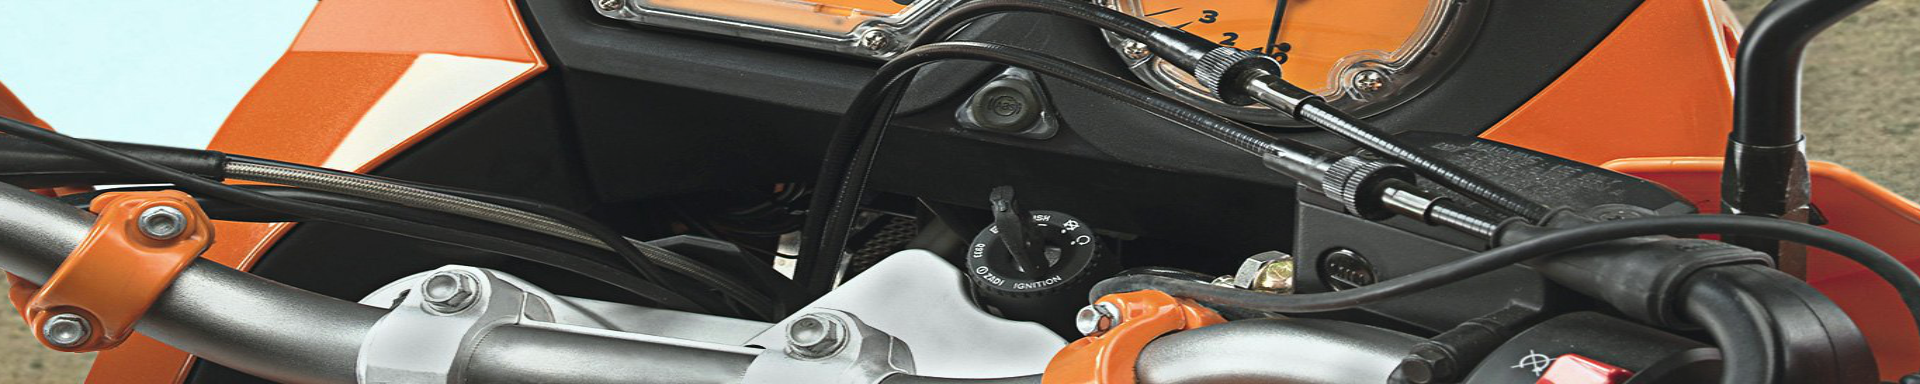 Cables & Brackets | MunroPowersports.com | Munro Industries mp-100803081303